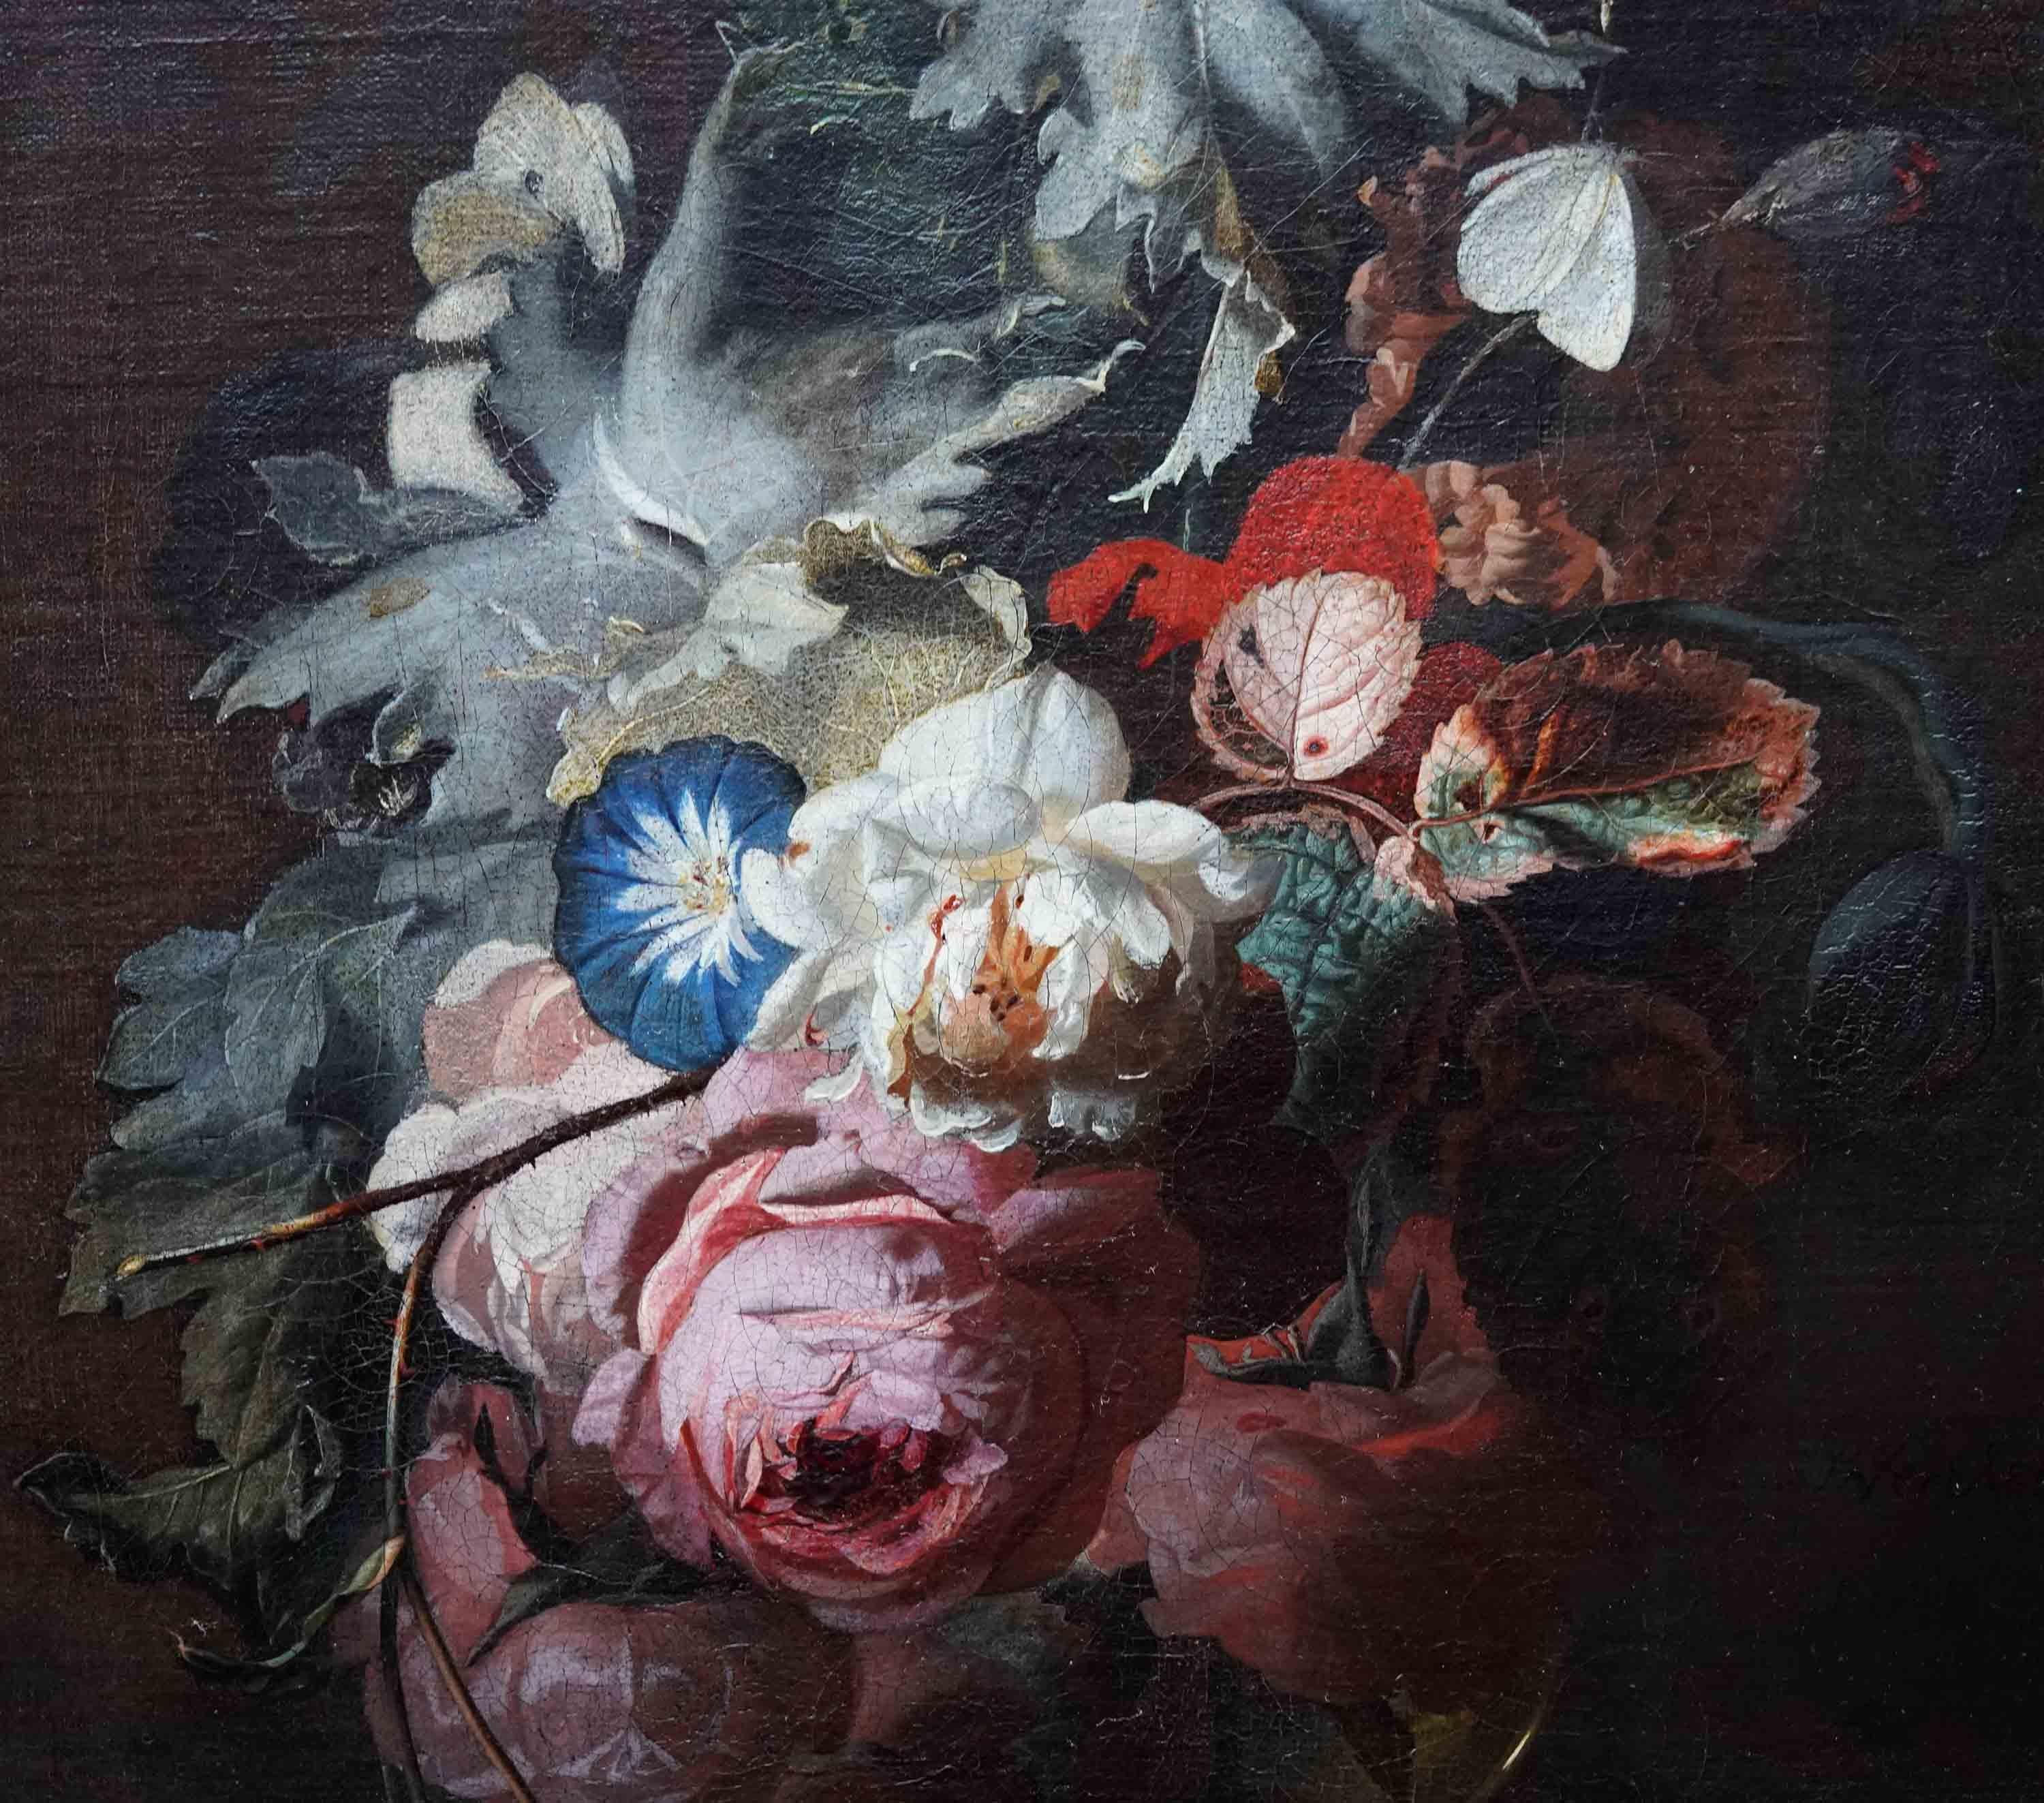 This stunning 17th century Dutch Old Master Golden Age floral oil painting is by noted Dutch artist Simon Pietersz Verelst. The full attribution to Verest was confirmed by Dr Fred Meijer and it is both signed and dated lower right. This superb still